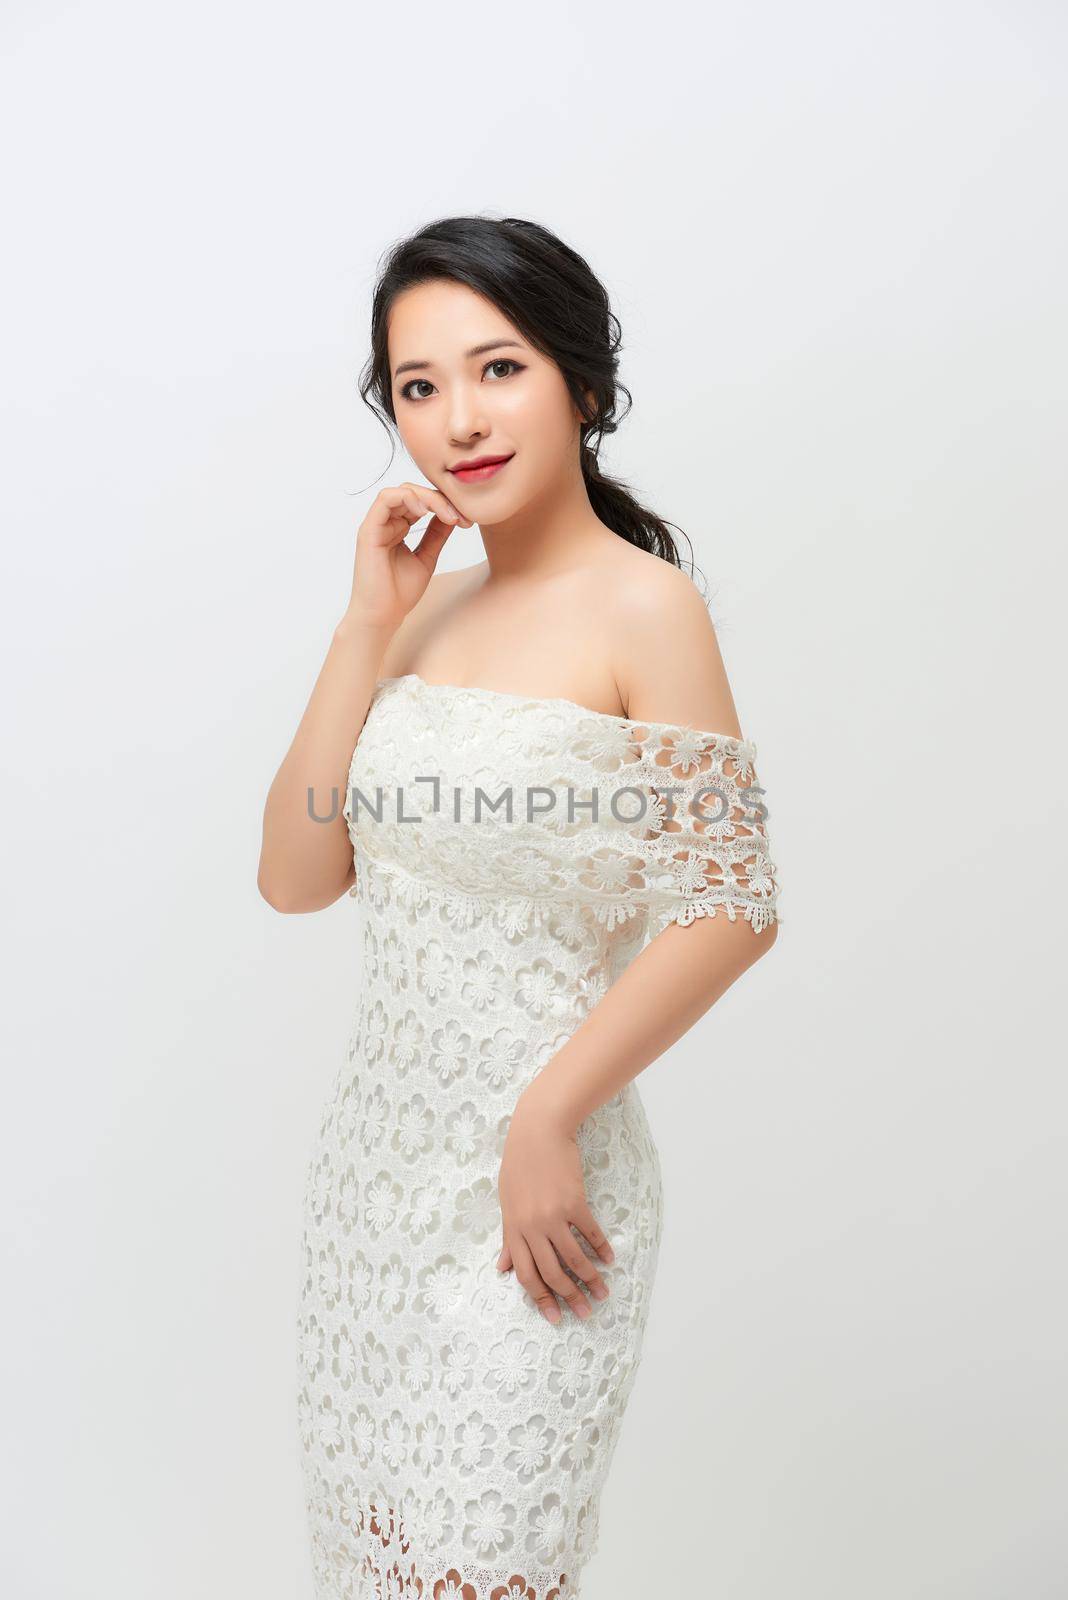 A beautiful girl with great figure in the white lace wedding dress by makidotvn